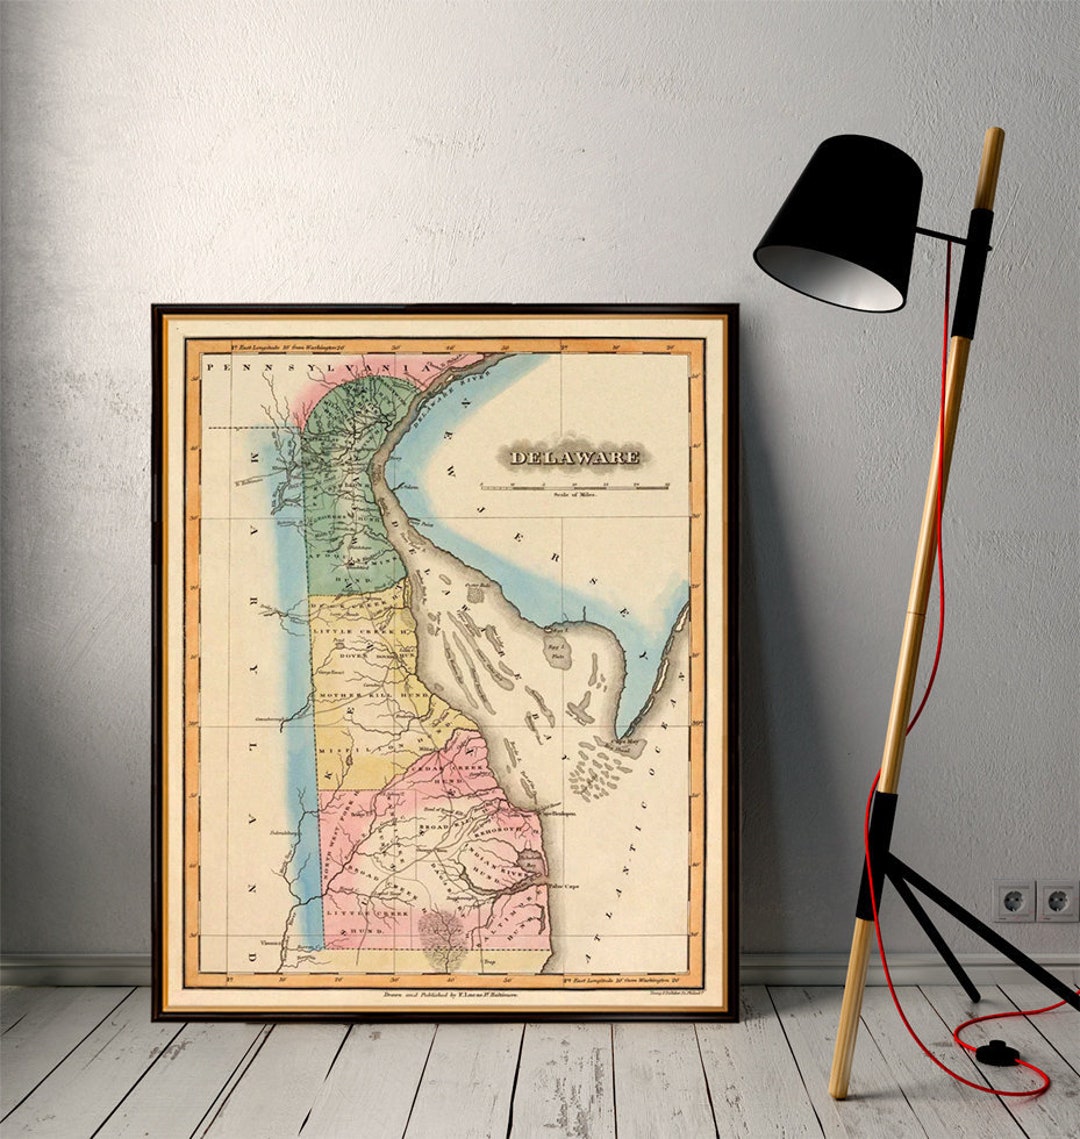 Map of Delaware Old Delaware Map Reproductio on Fine Coated